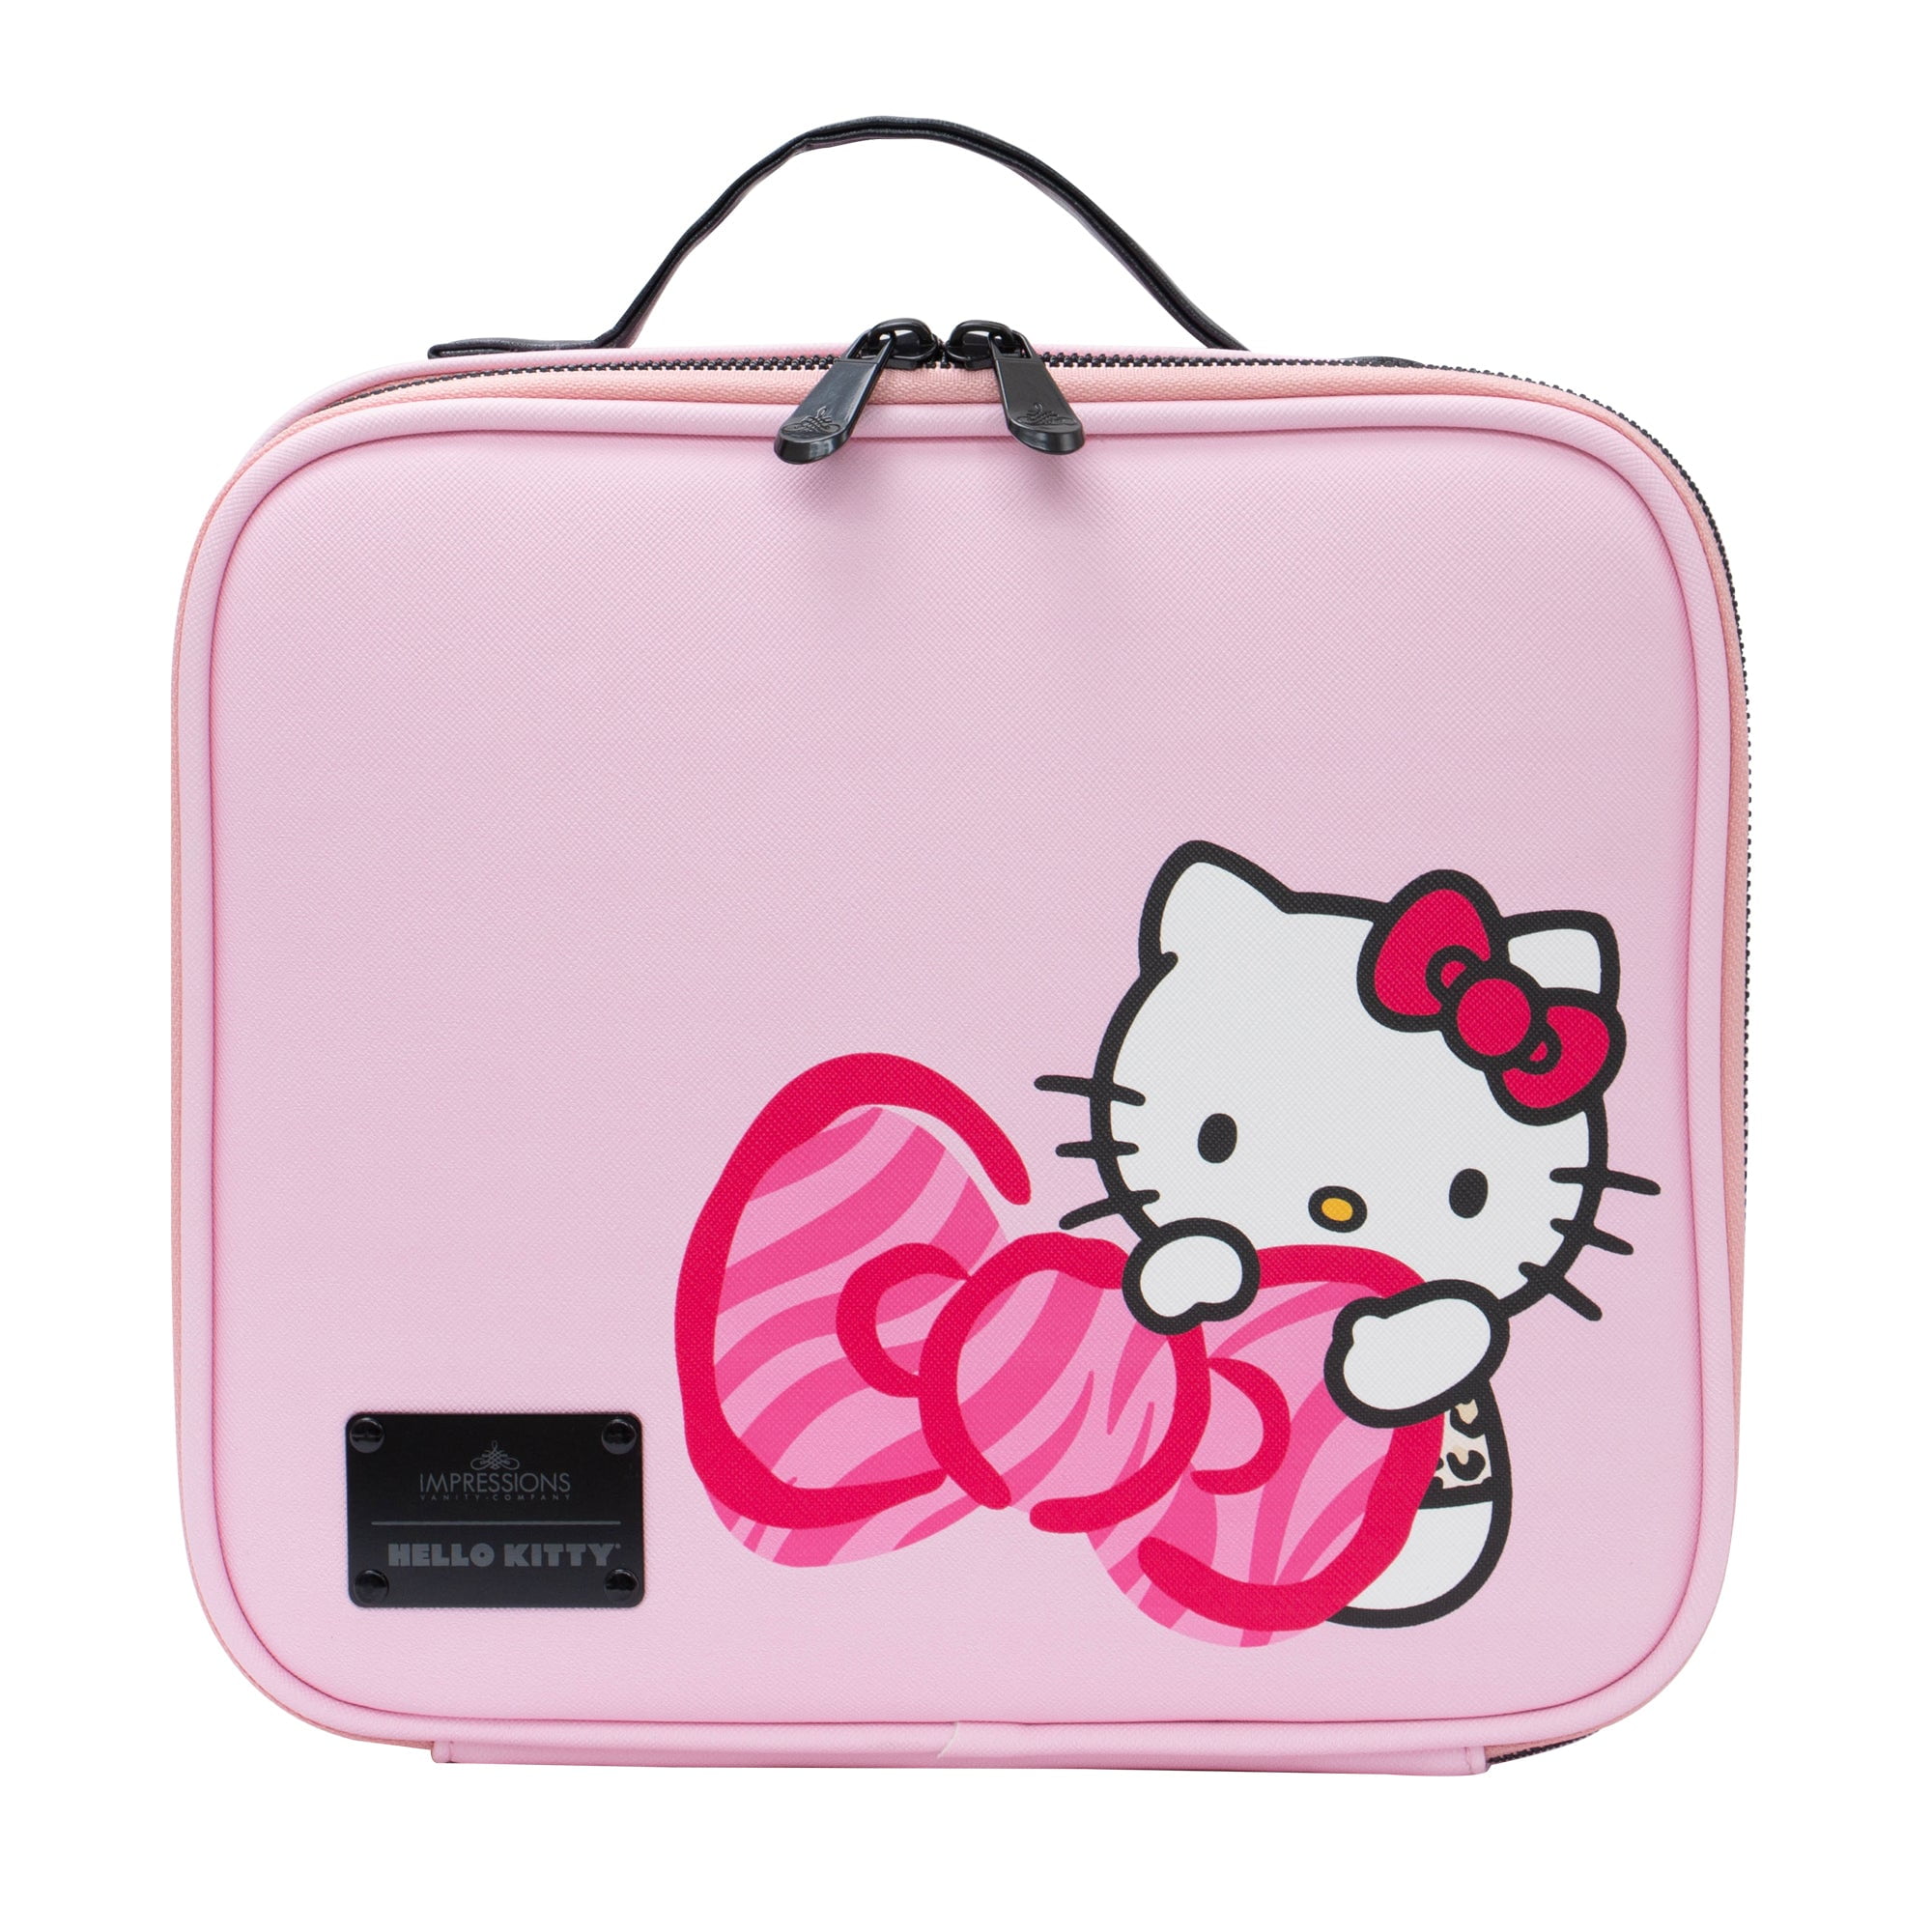 Impressions Vanity Hello Kitty Cosmetic Bag with Faux Leather, Travel ...